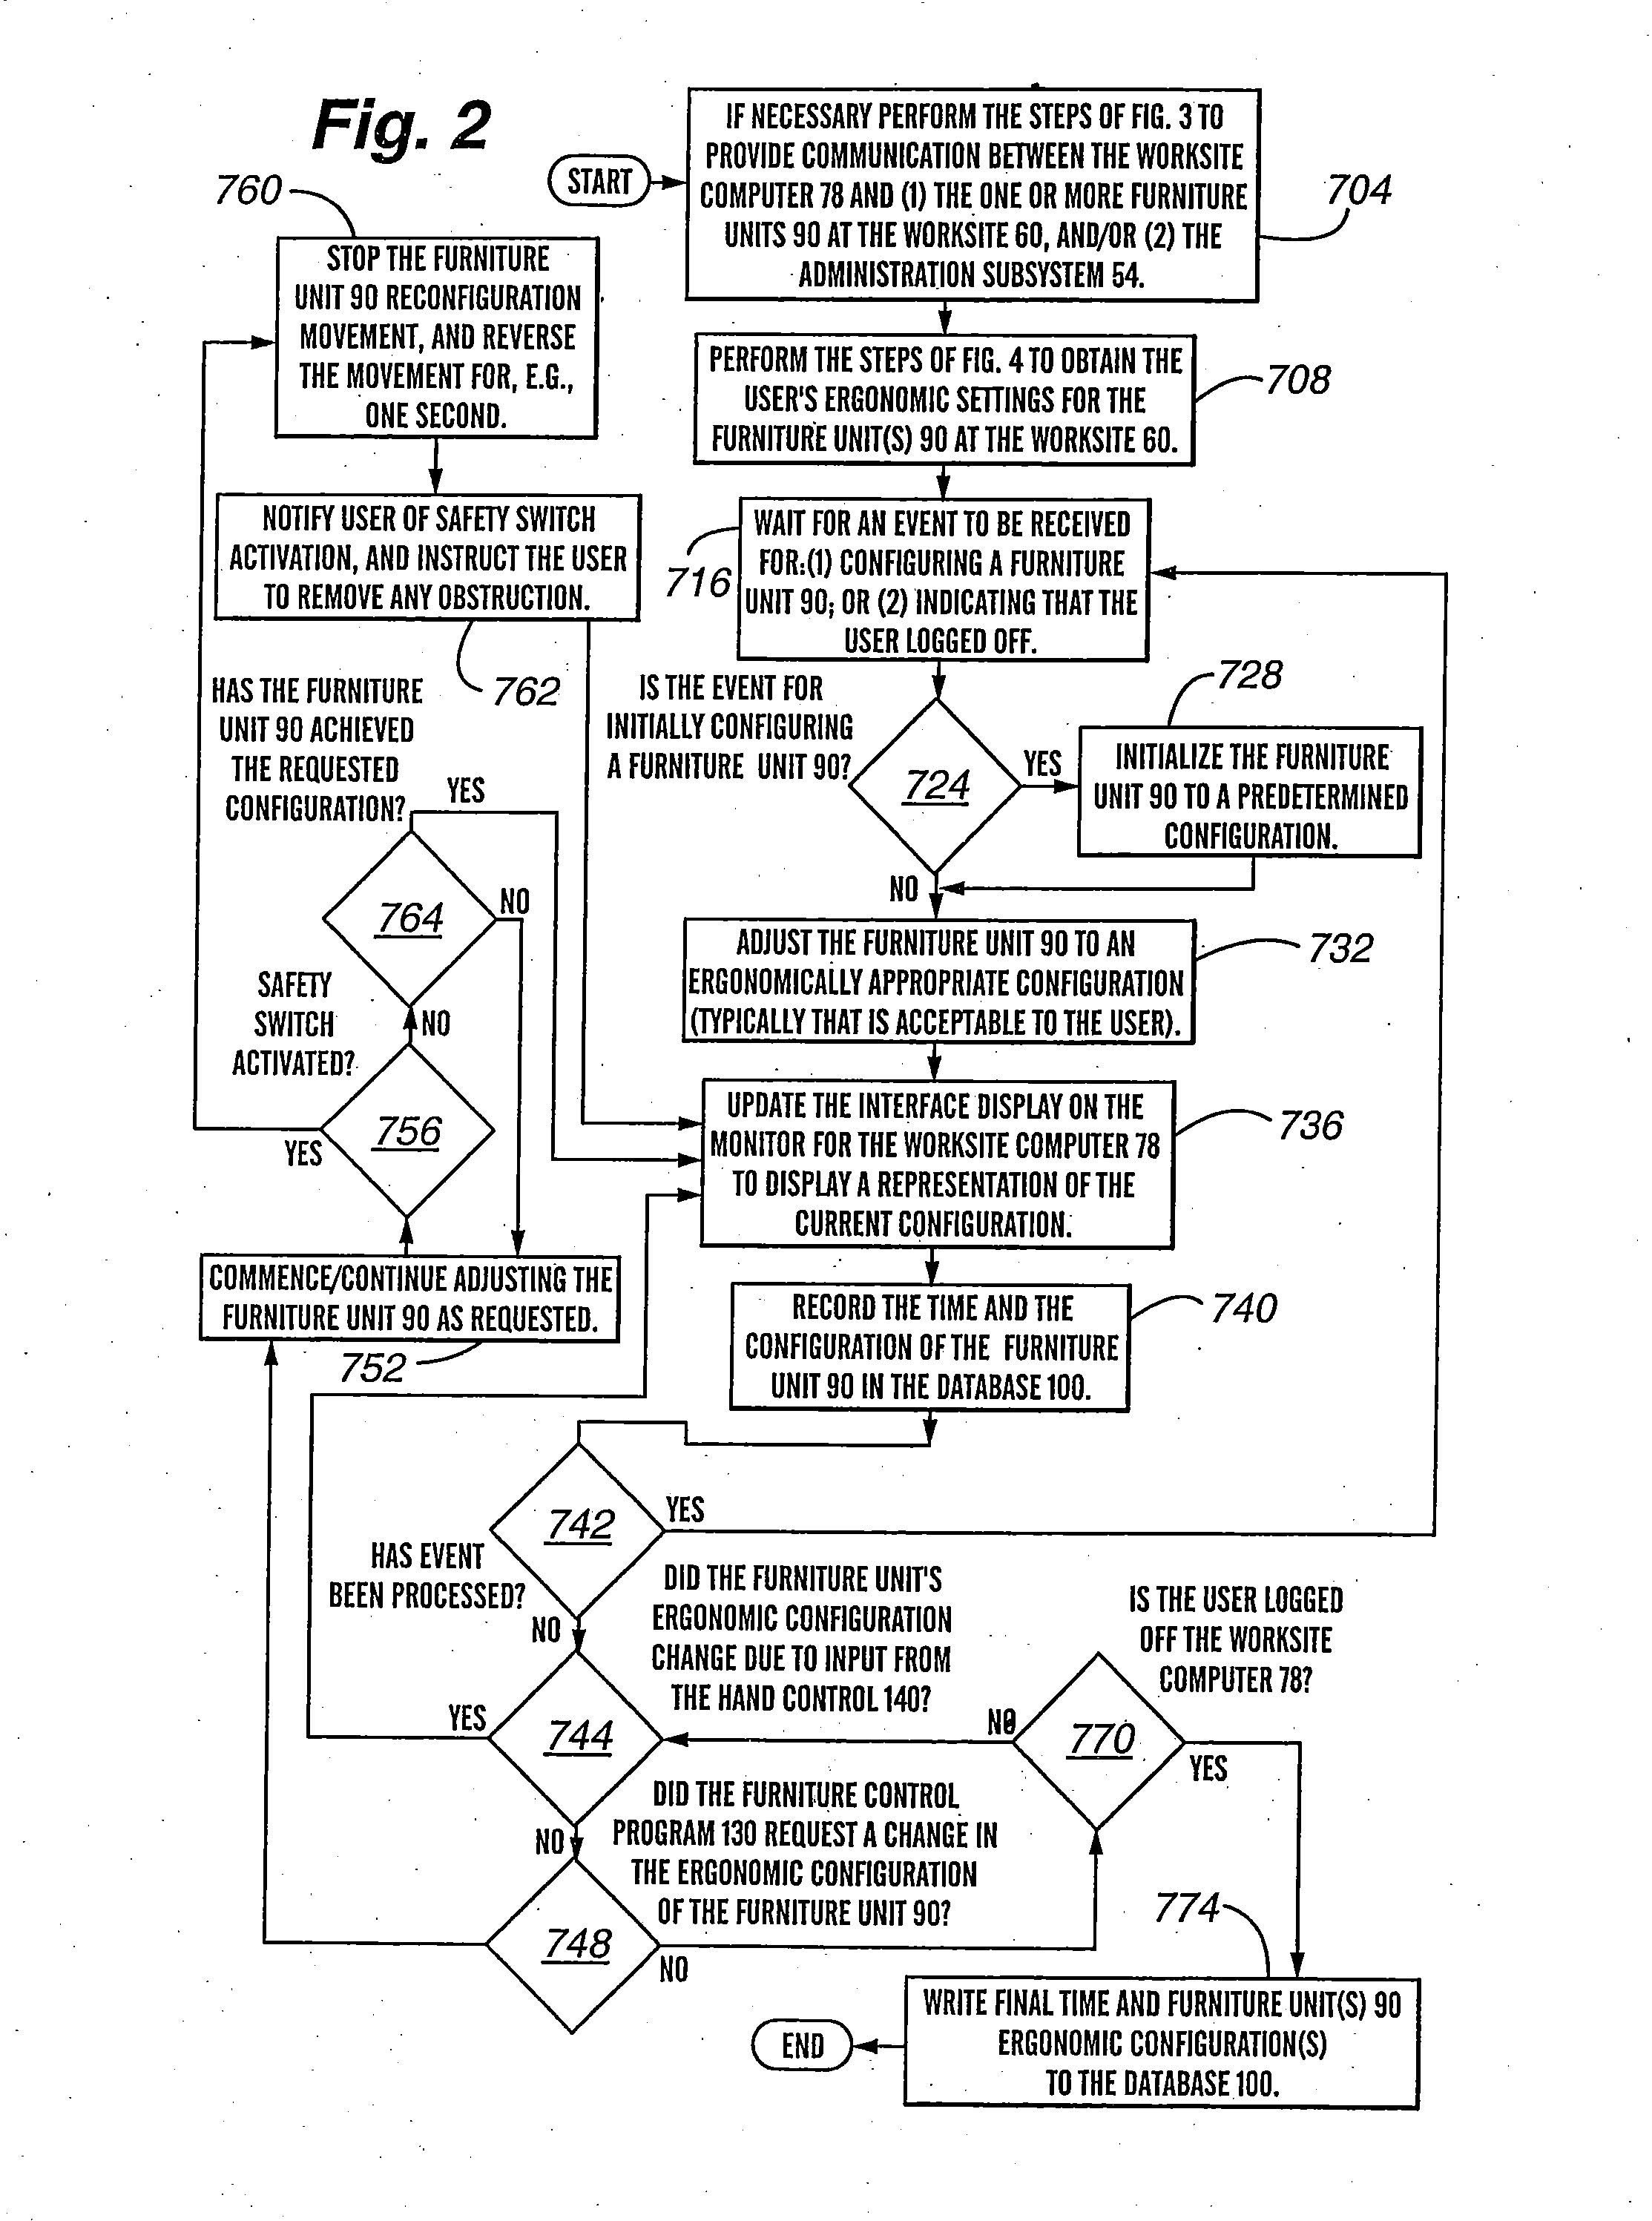 Method and system for controlling ergonomic settings at a worksite